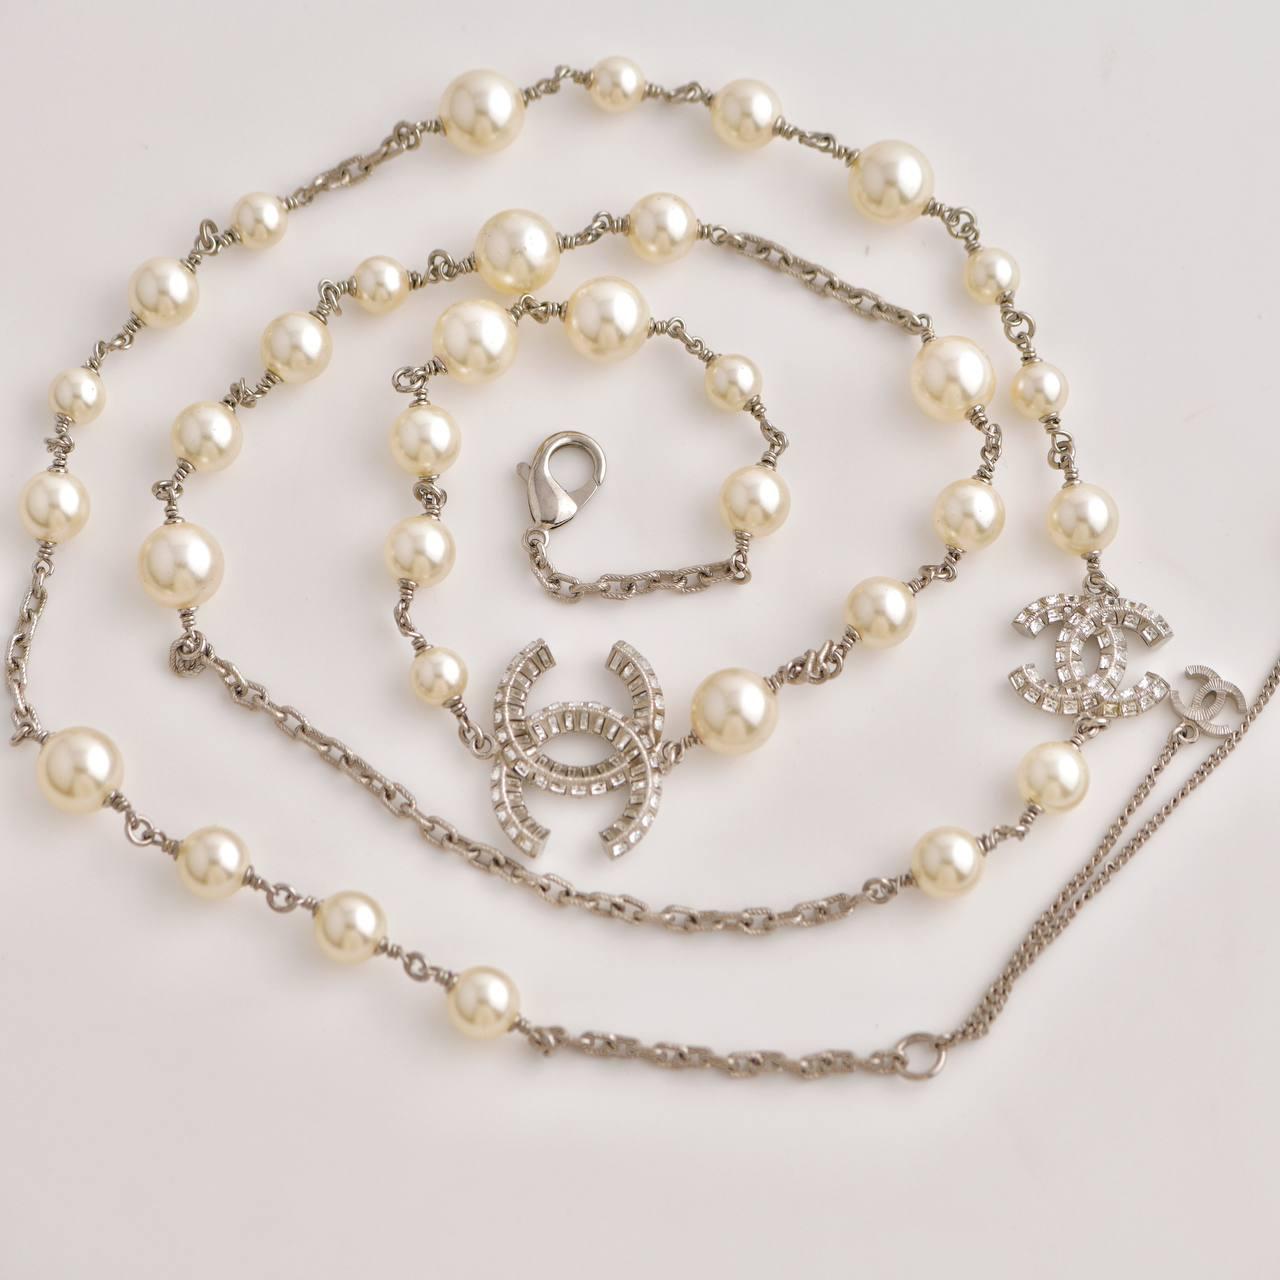 Women's or Men's Chanel 3 CC White Pearl and Crystal Long Necklace